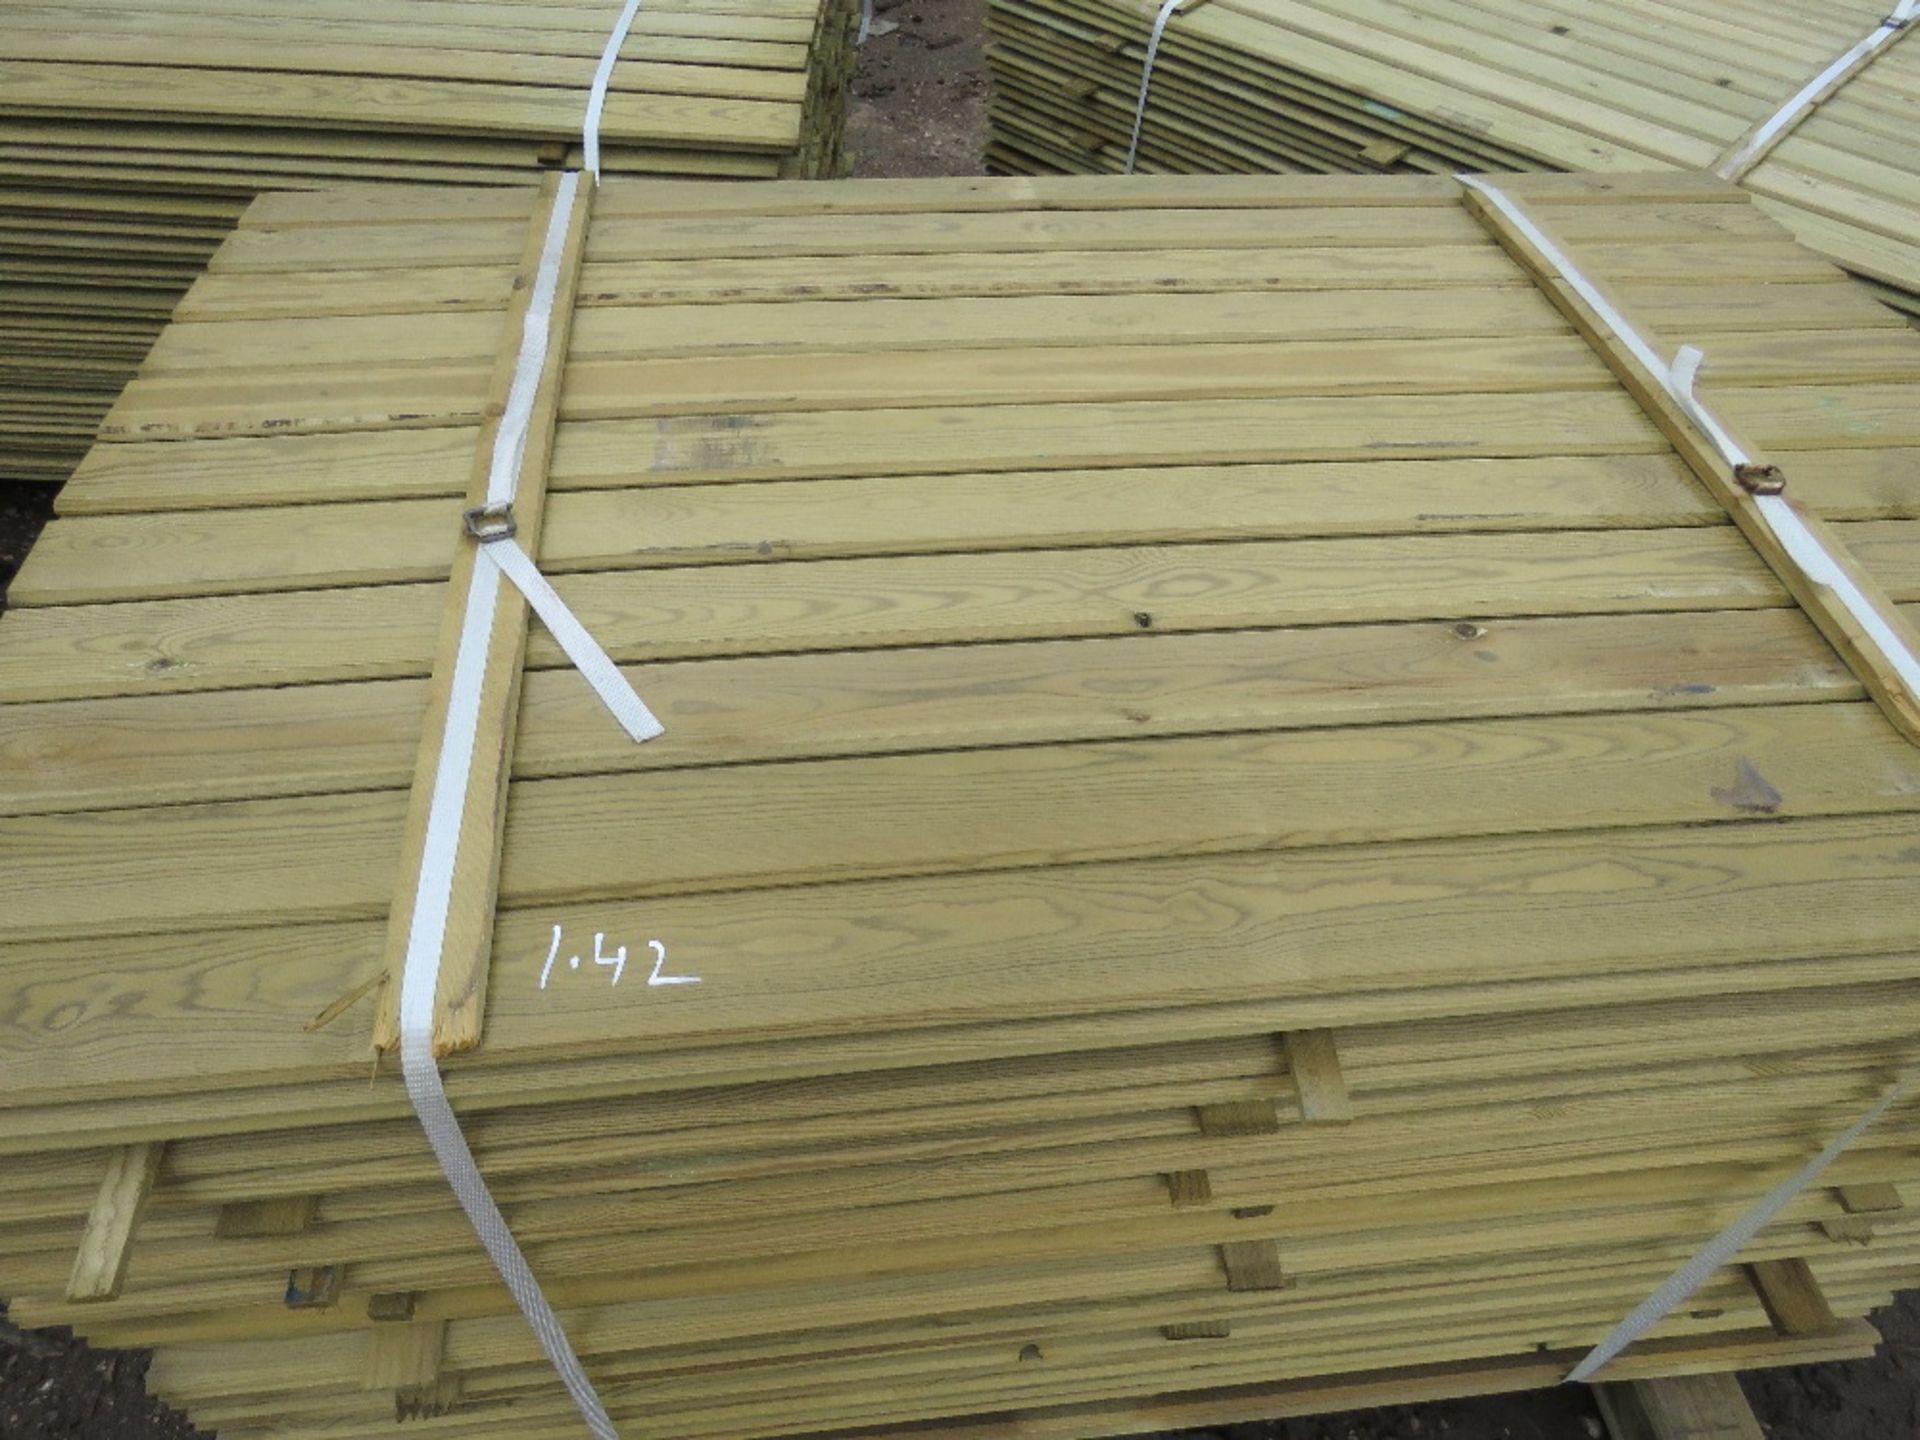 LARGE PACK OF SHIPLAP CLADDING TIMBER 1.42METRES LENGTH X 9.5CM WIDE X 1.5CM DEPTH APPROX - Image 3 of 3